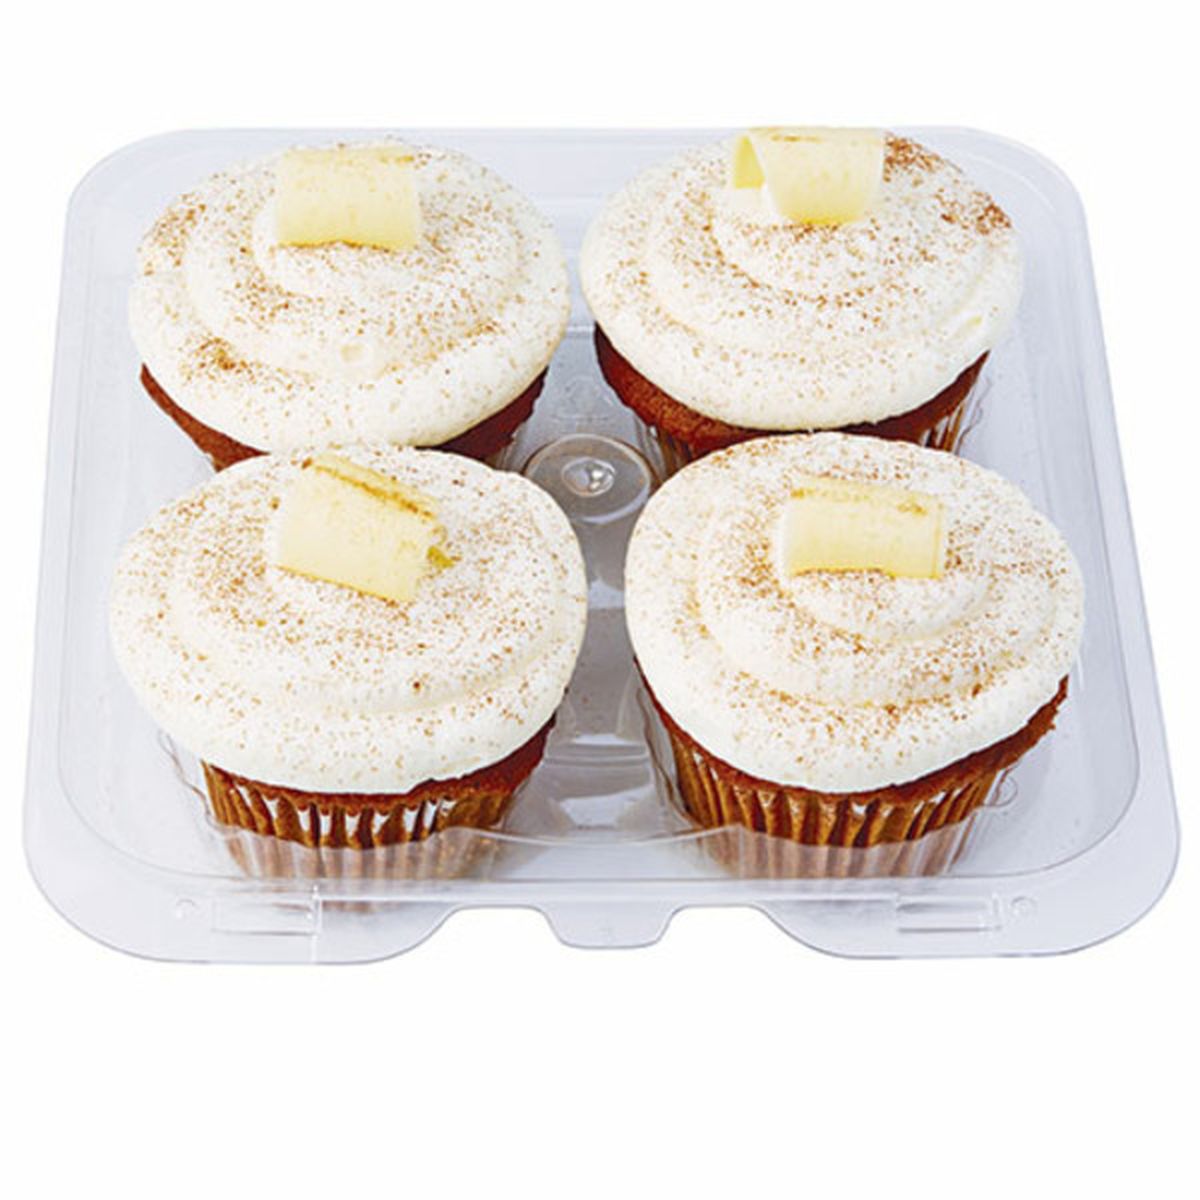 Calories in Wegmans Pumpkin Cupcakes with Cream Cheese Frosting, 4 Pack